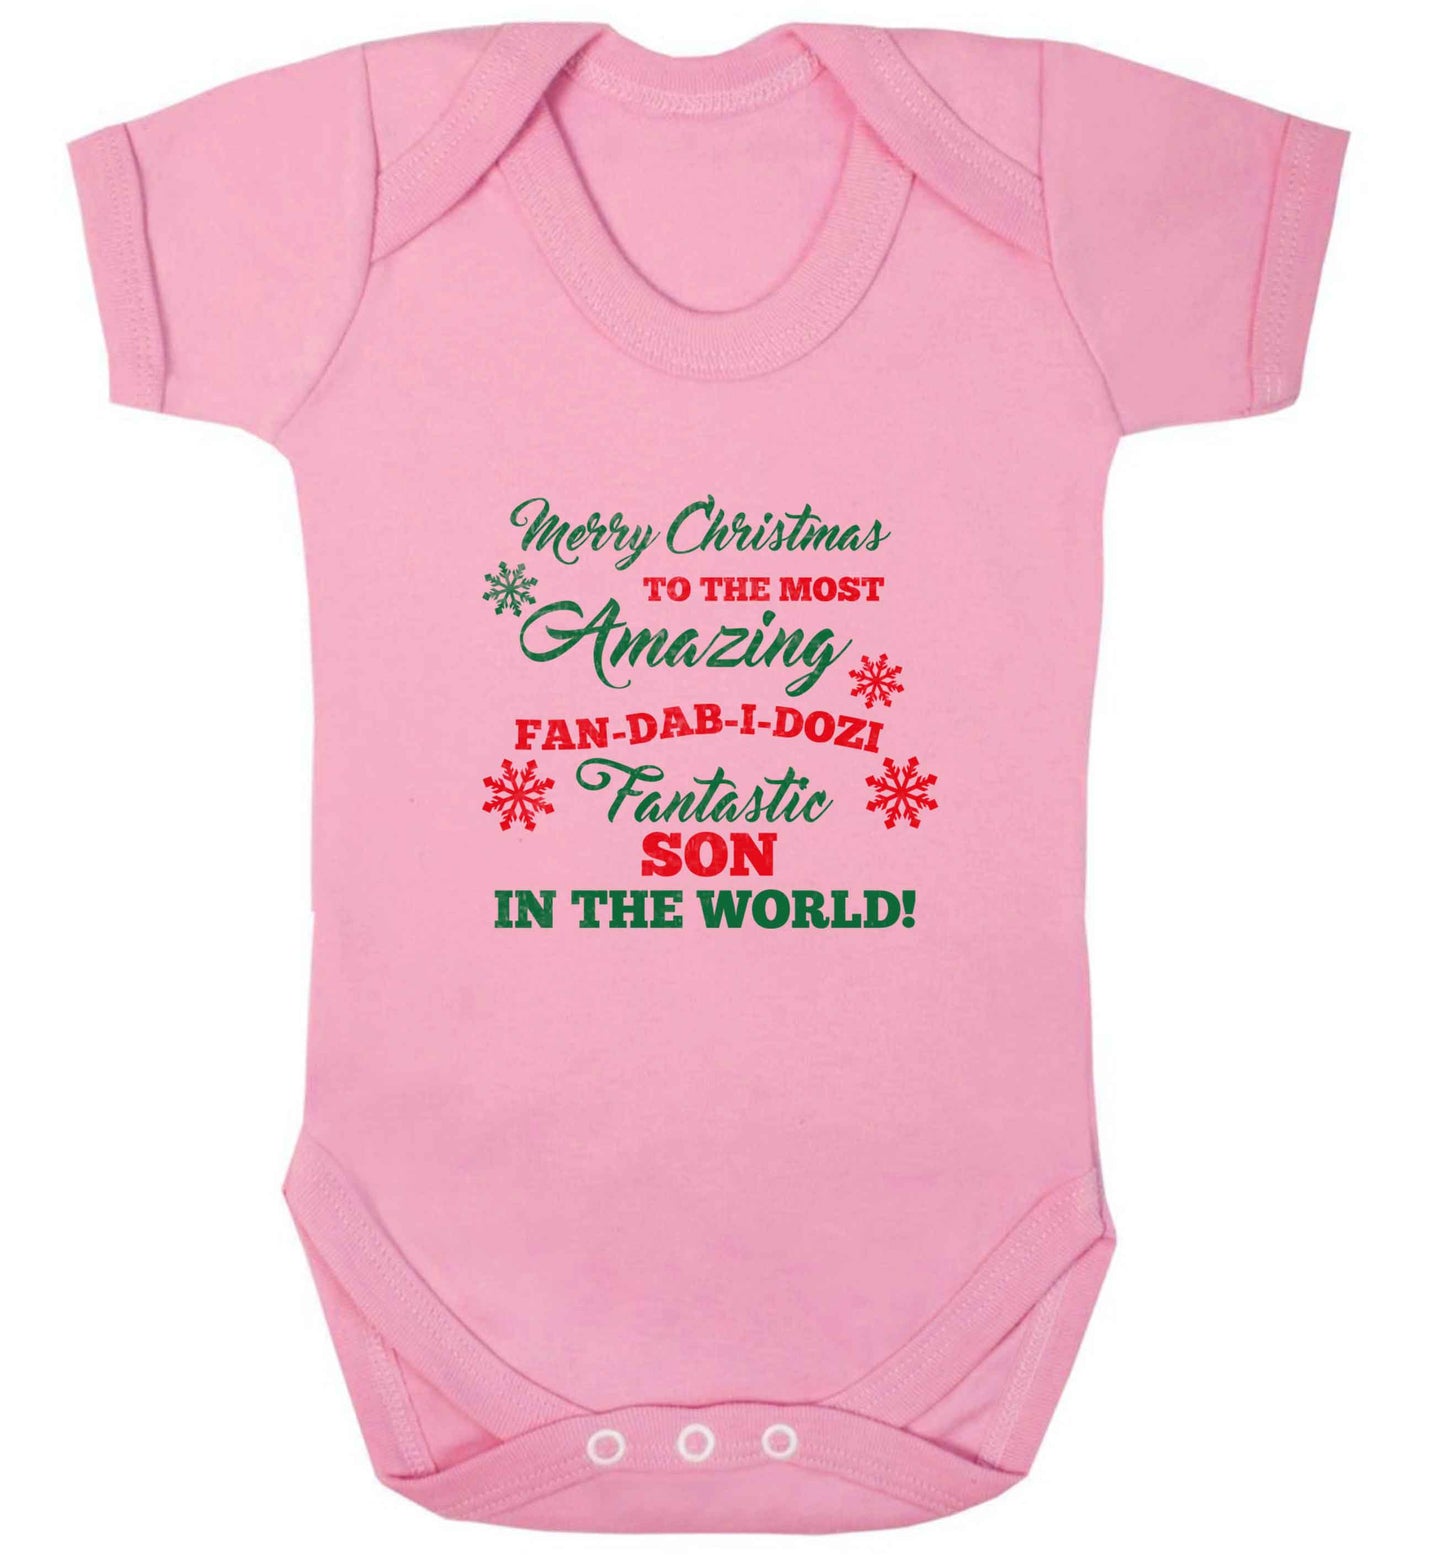 Merry Christmas to the most amazing fan-dab-i-dozi fantasic Son in the world baby vest pale pink 18-24 months